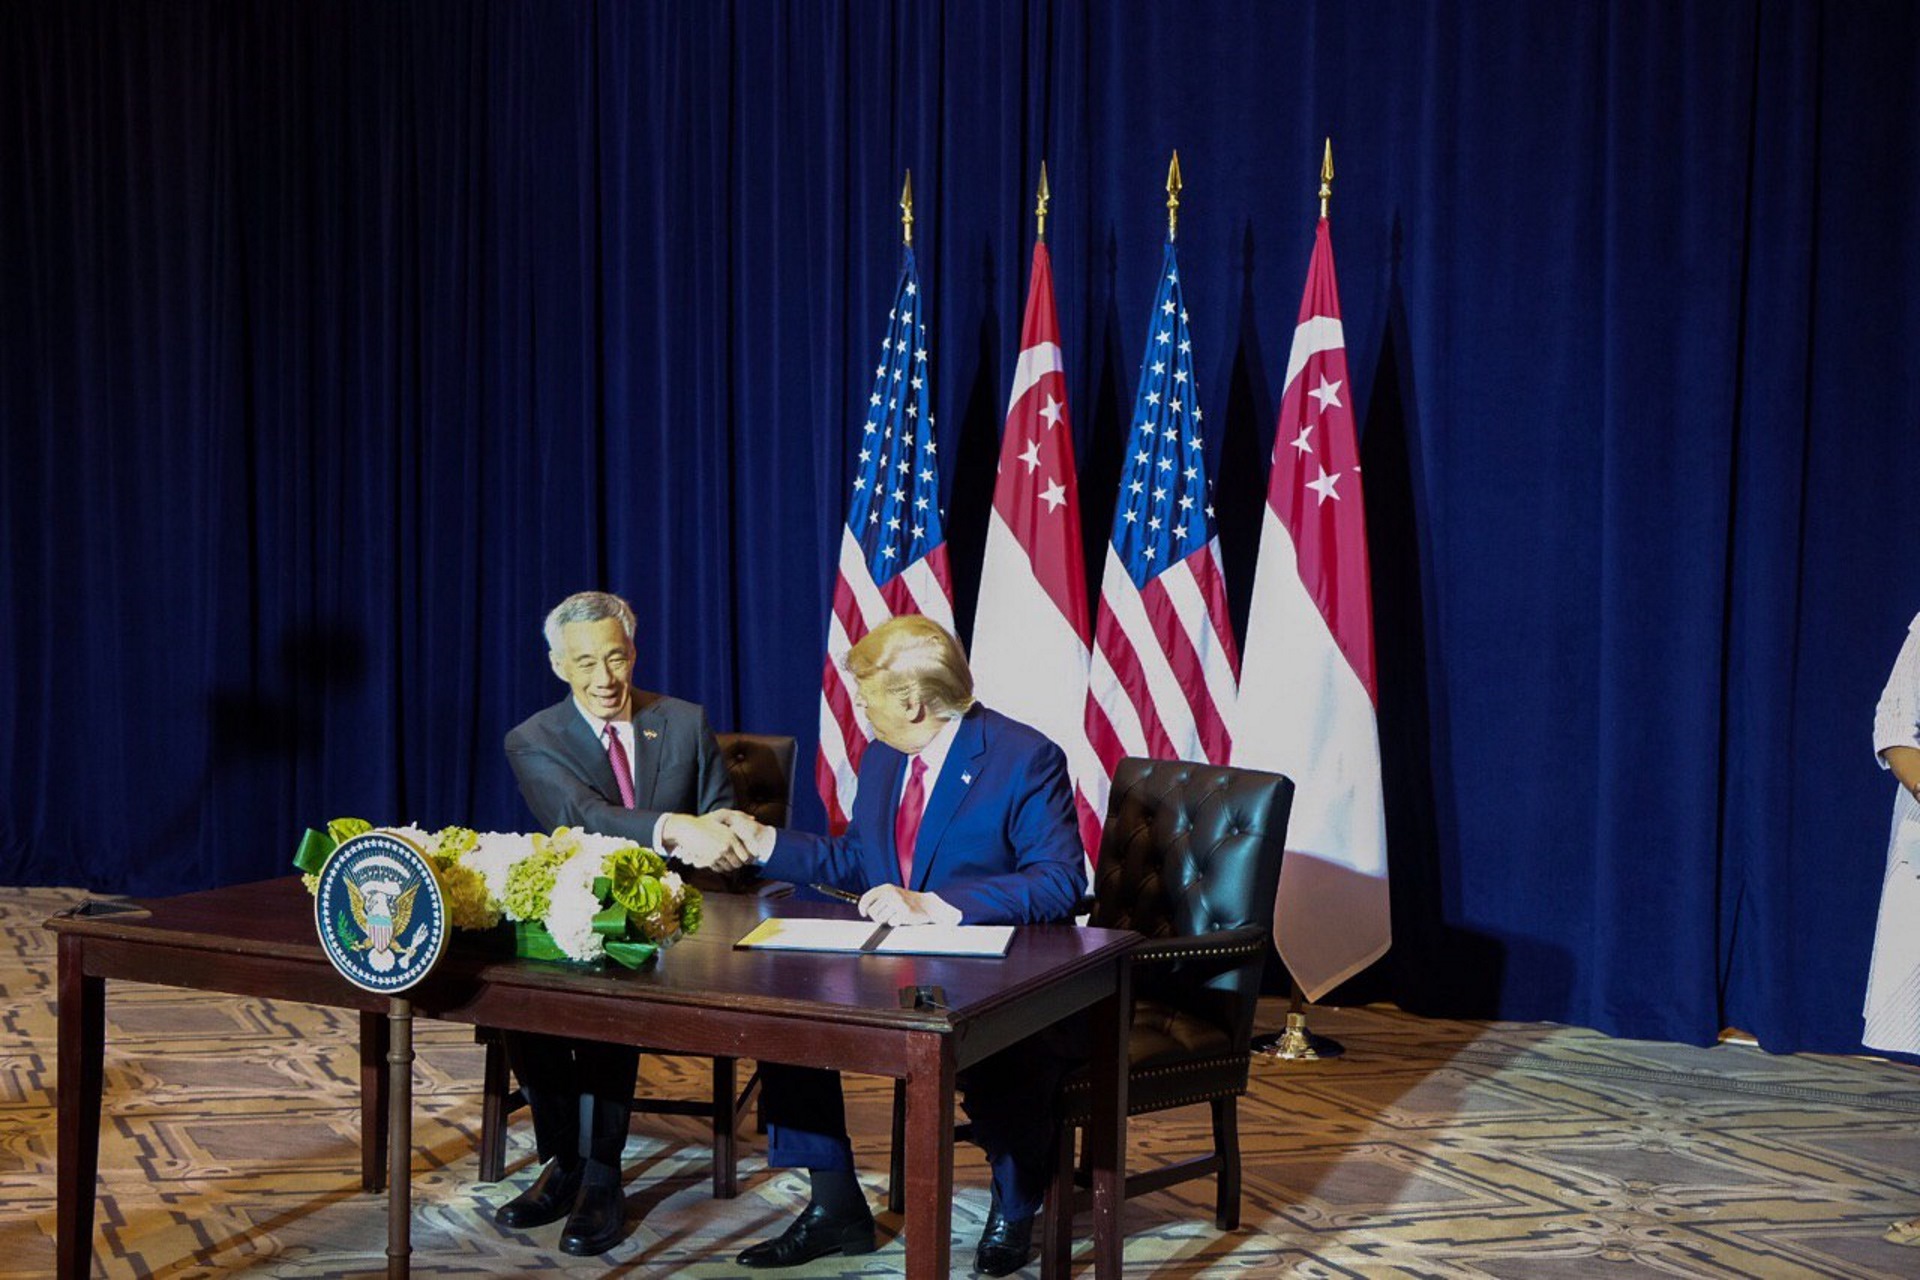 Prime Minister (PM) Lee Hsien Loong and President of the United States of America Donald Trump shaking hands after signing the Protocol of Amendment to the 1990 Memorandum of Understanding Regarding United States Use of Facilities in Singapore. 